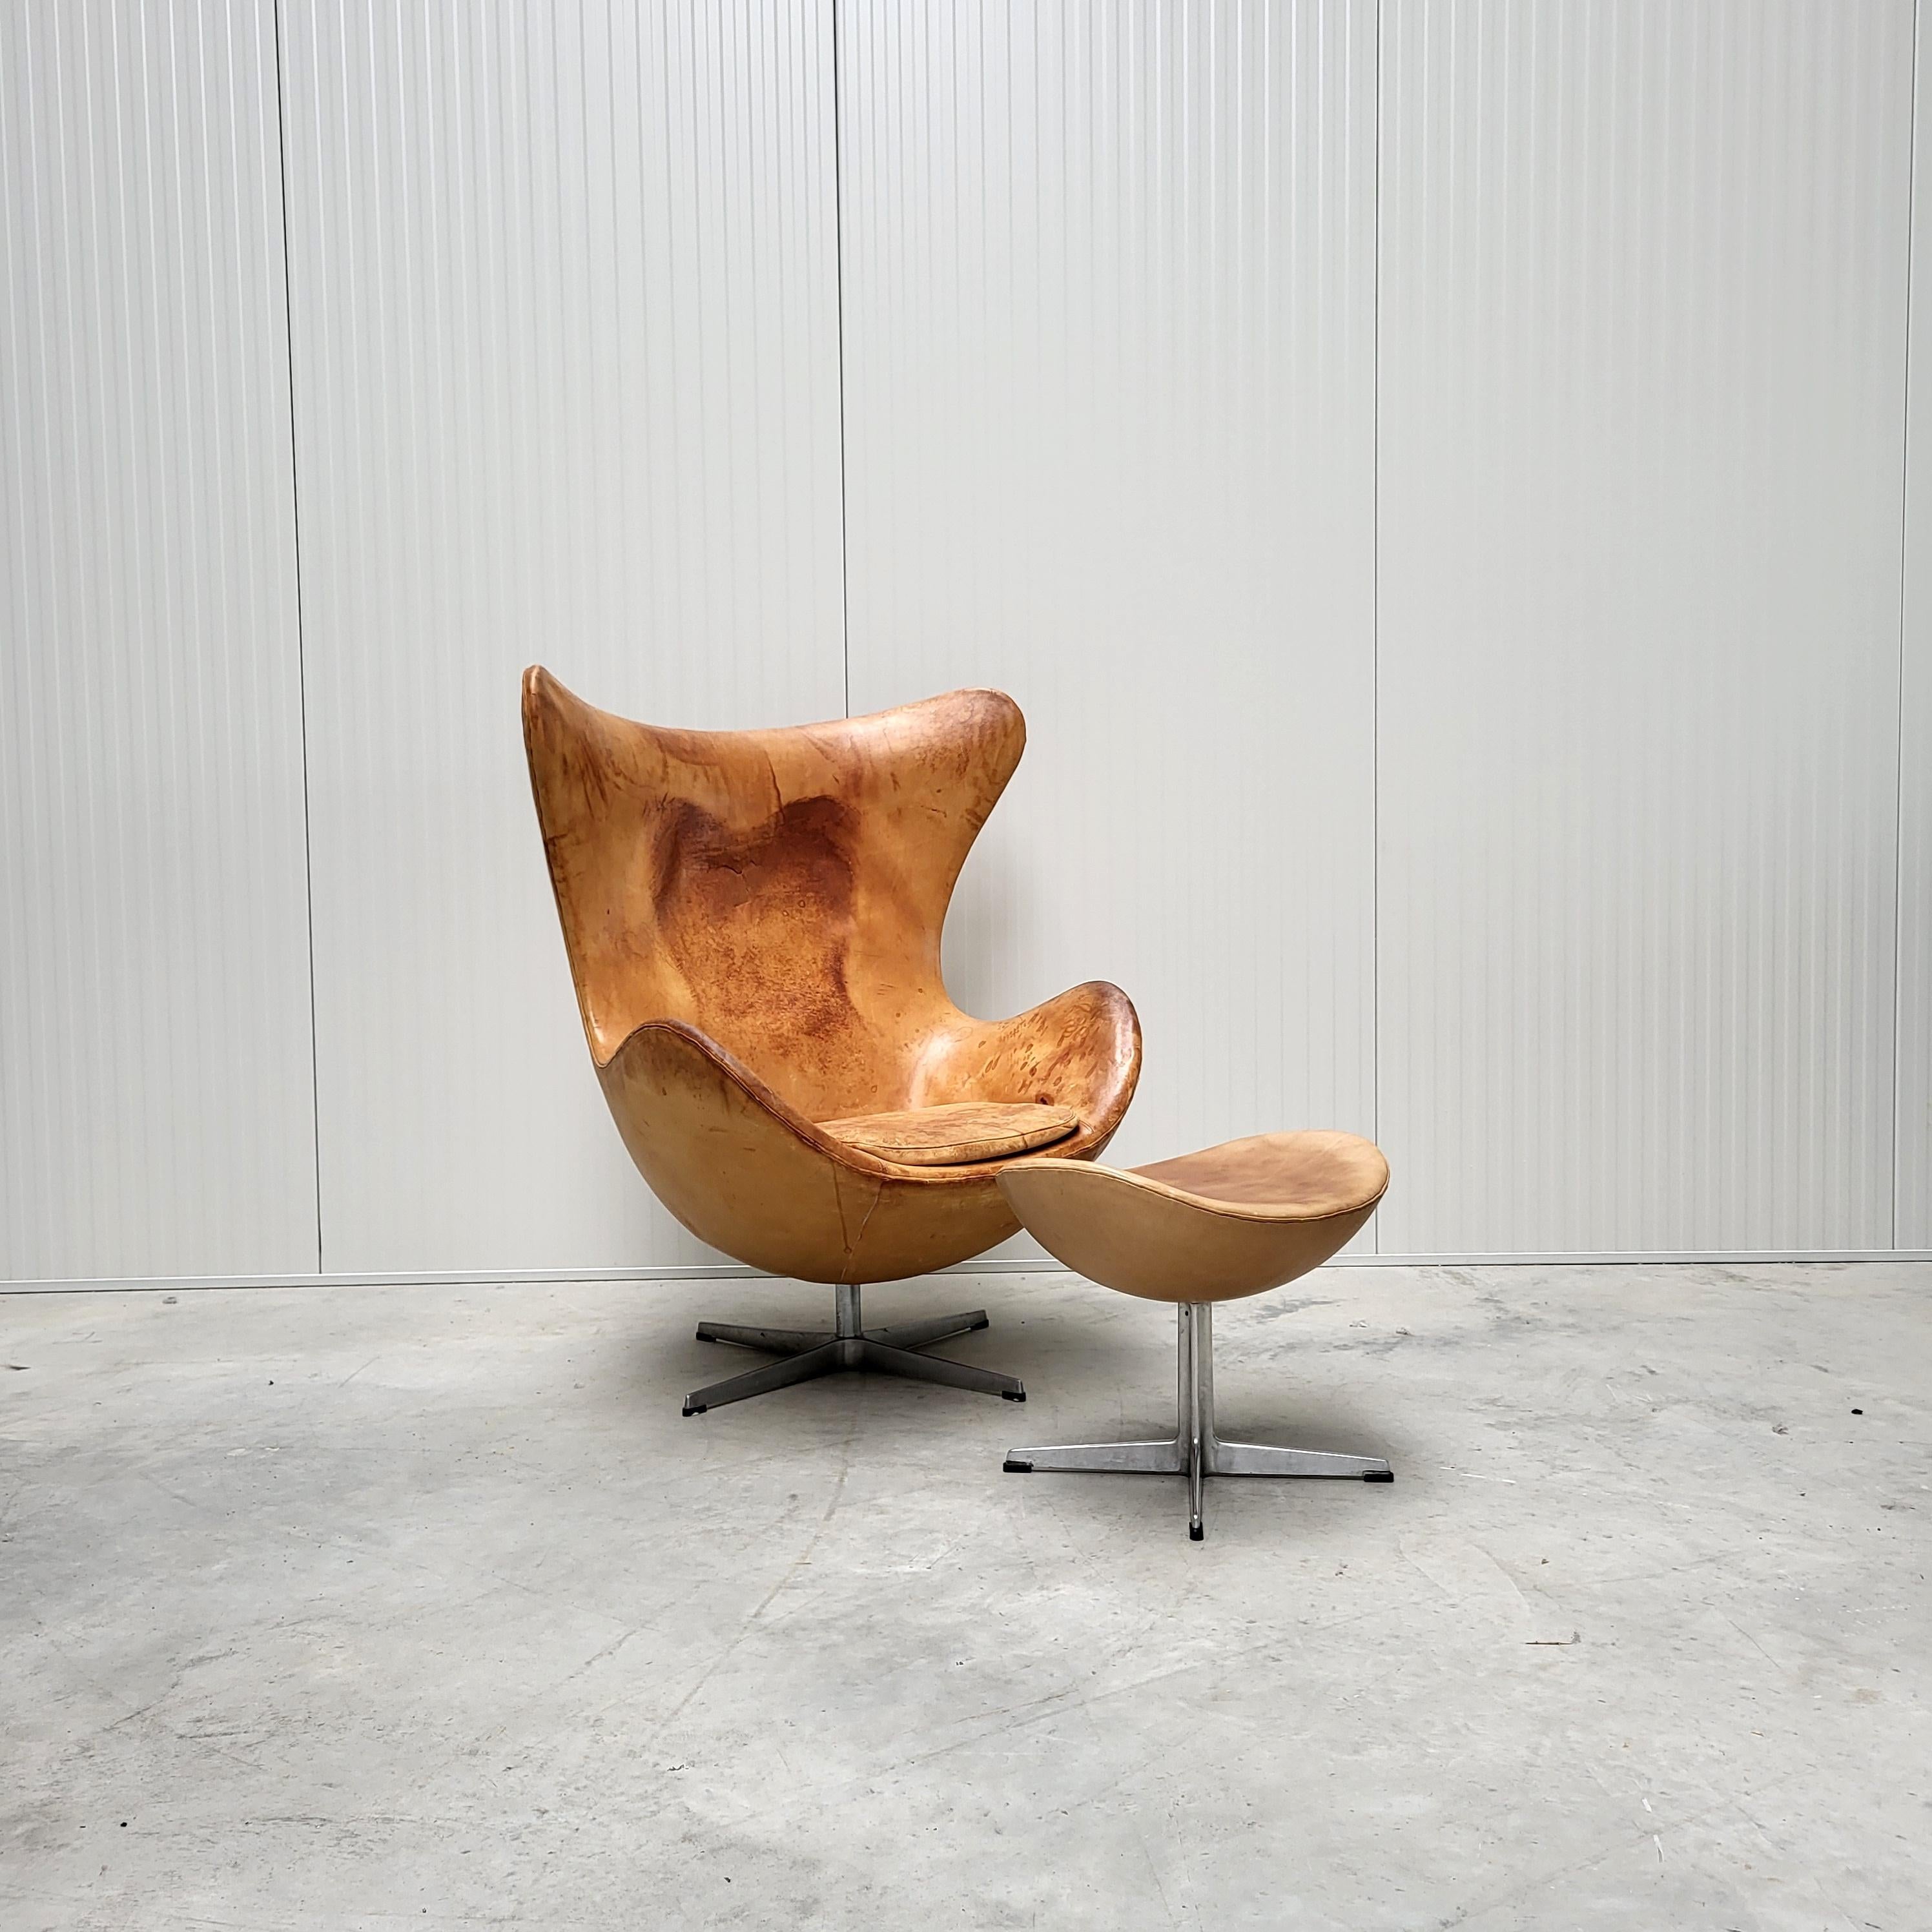 This very rare 70s edition Egg chair and ottoman was designed in the 50s by Arne Jacobsen for the SAS Hotel in Copenhagen and produced by Fritz Hansen around 1979/1980. The Egg chair comes with a very fine semi anilin leather.

The chair features an